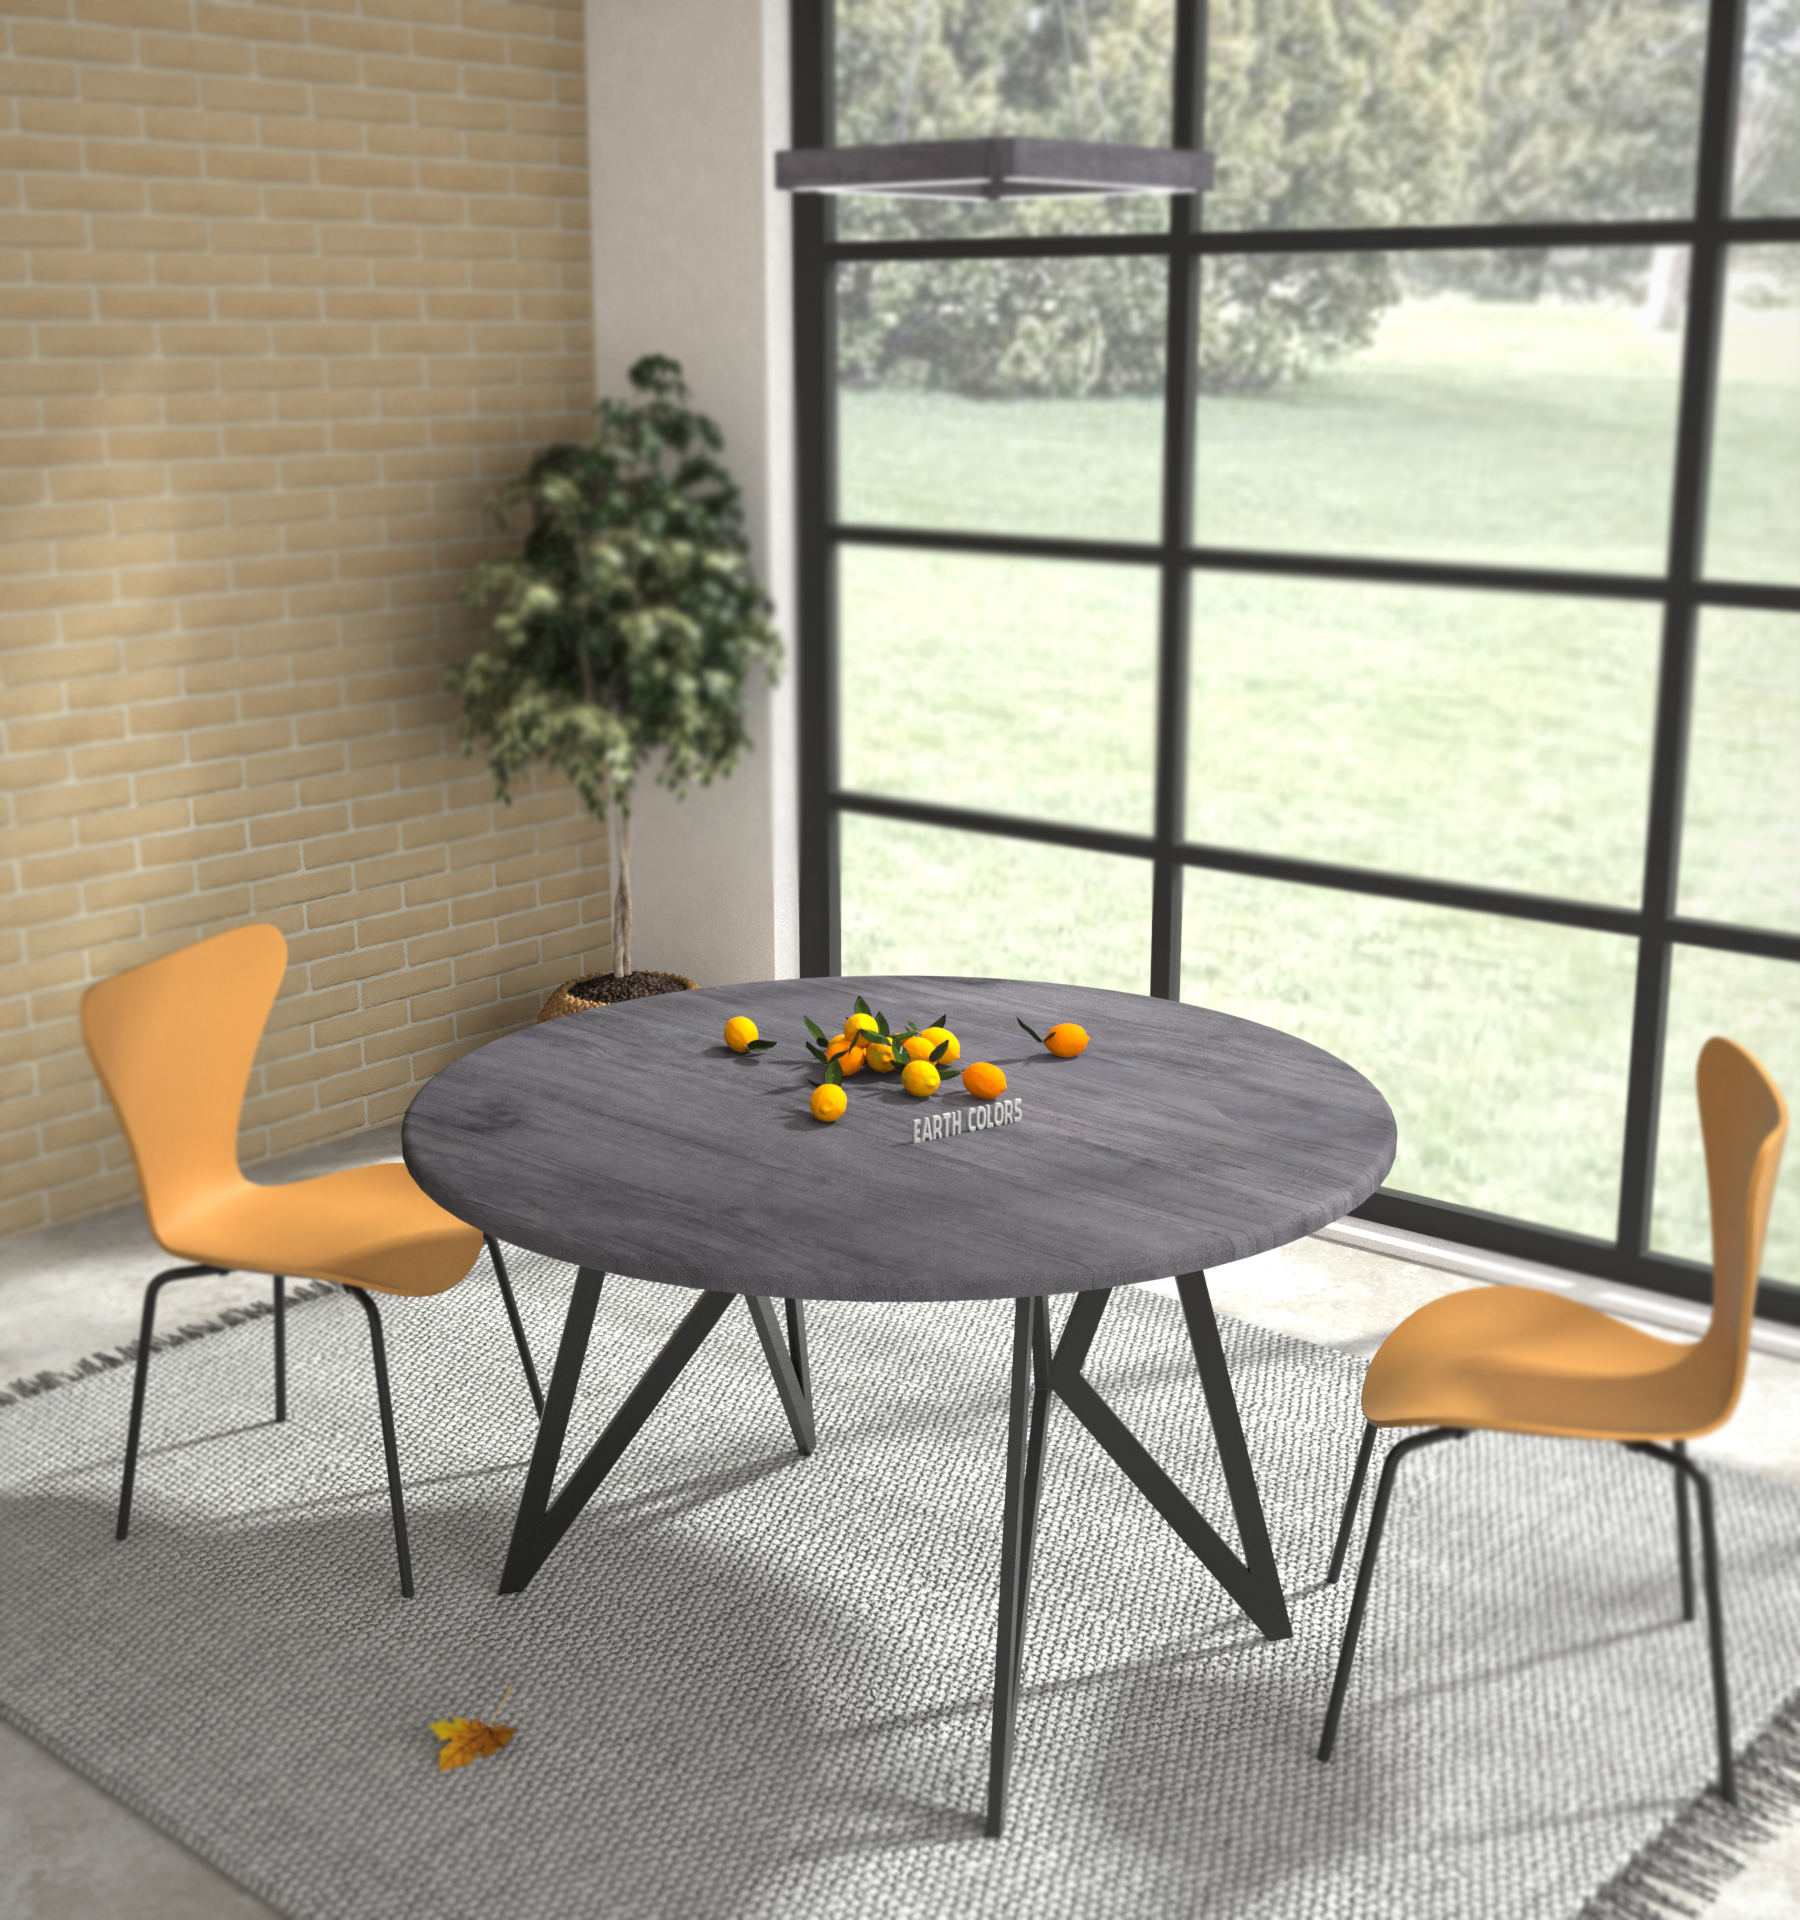 When dealing with round dining table 4 seater nothing can defeat EARTHCOLORS